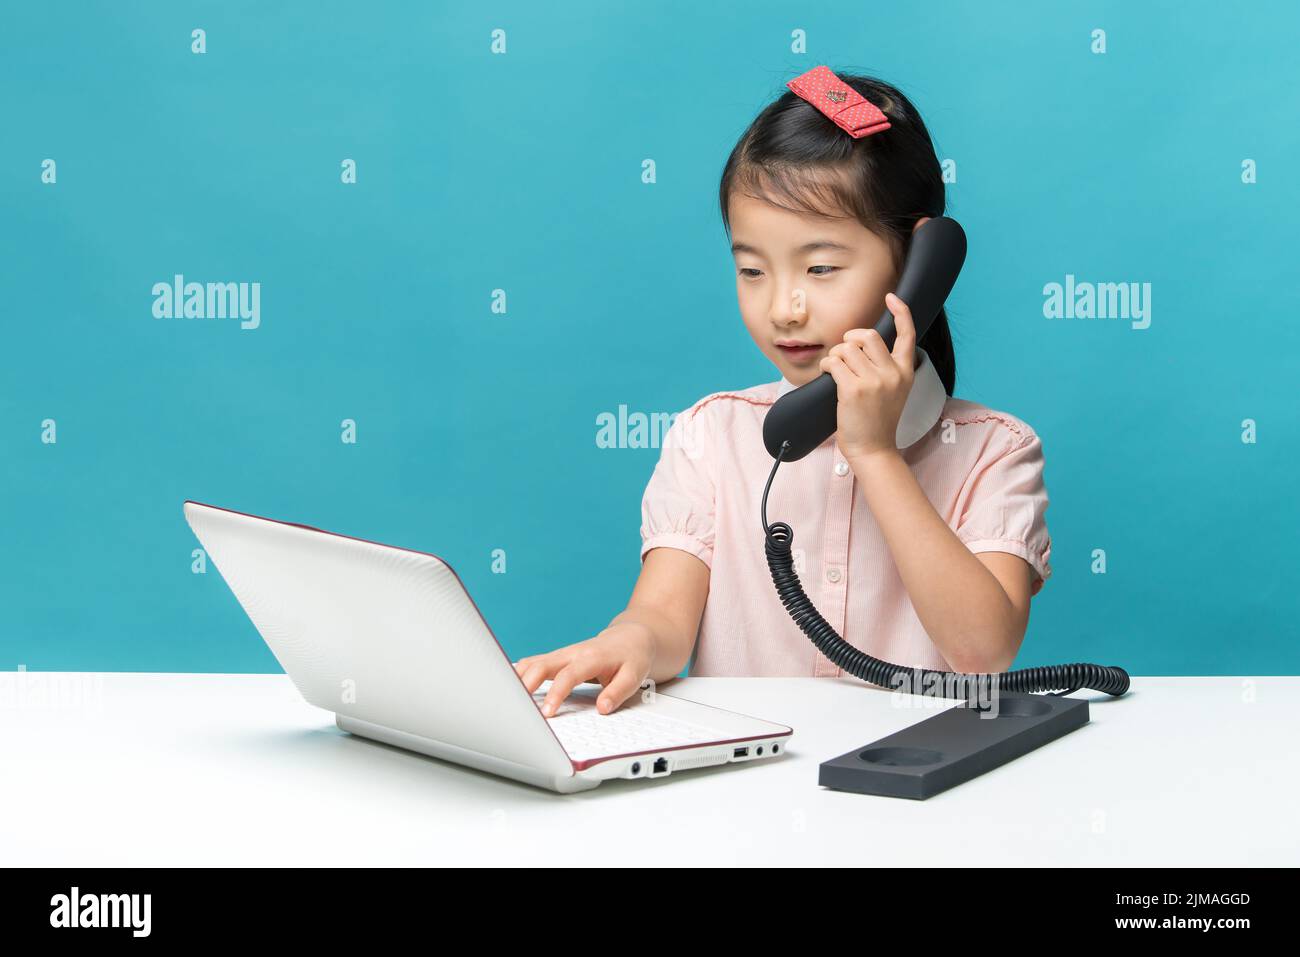 Cute asia little girl is sitting at table with her white laptop and a telephone, isolated over blue Stock Photo